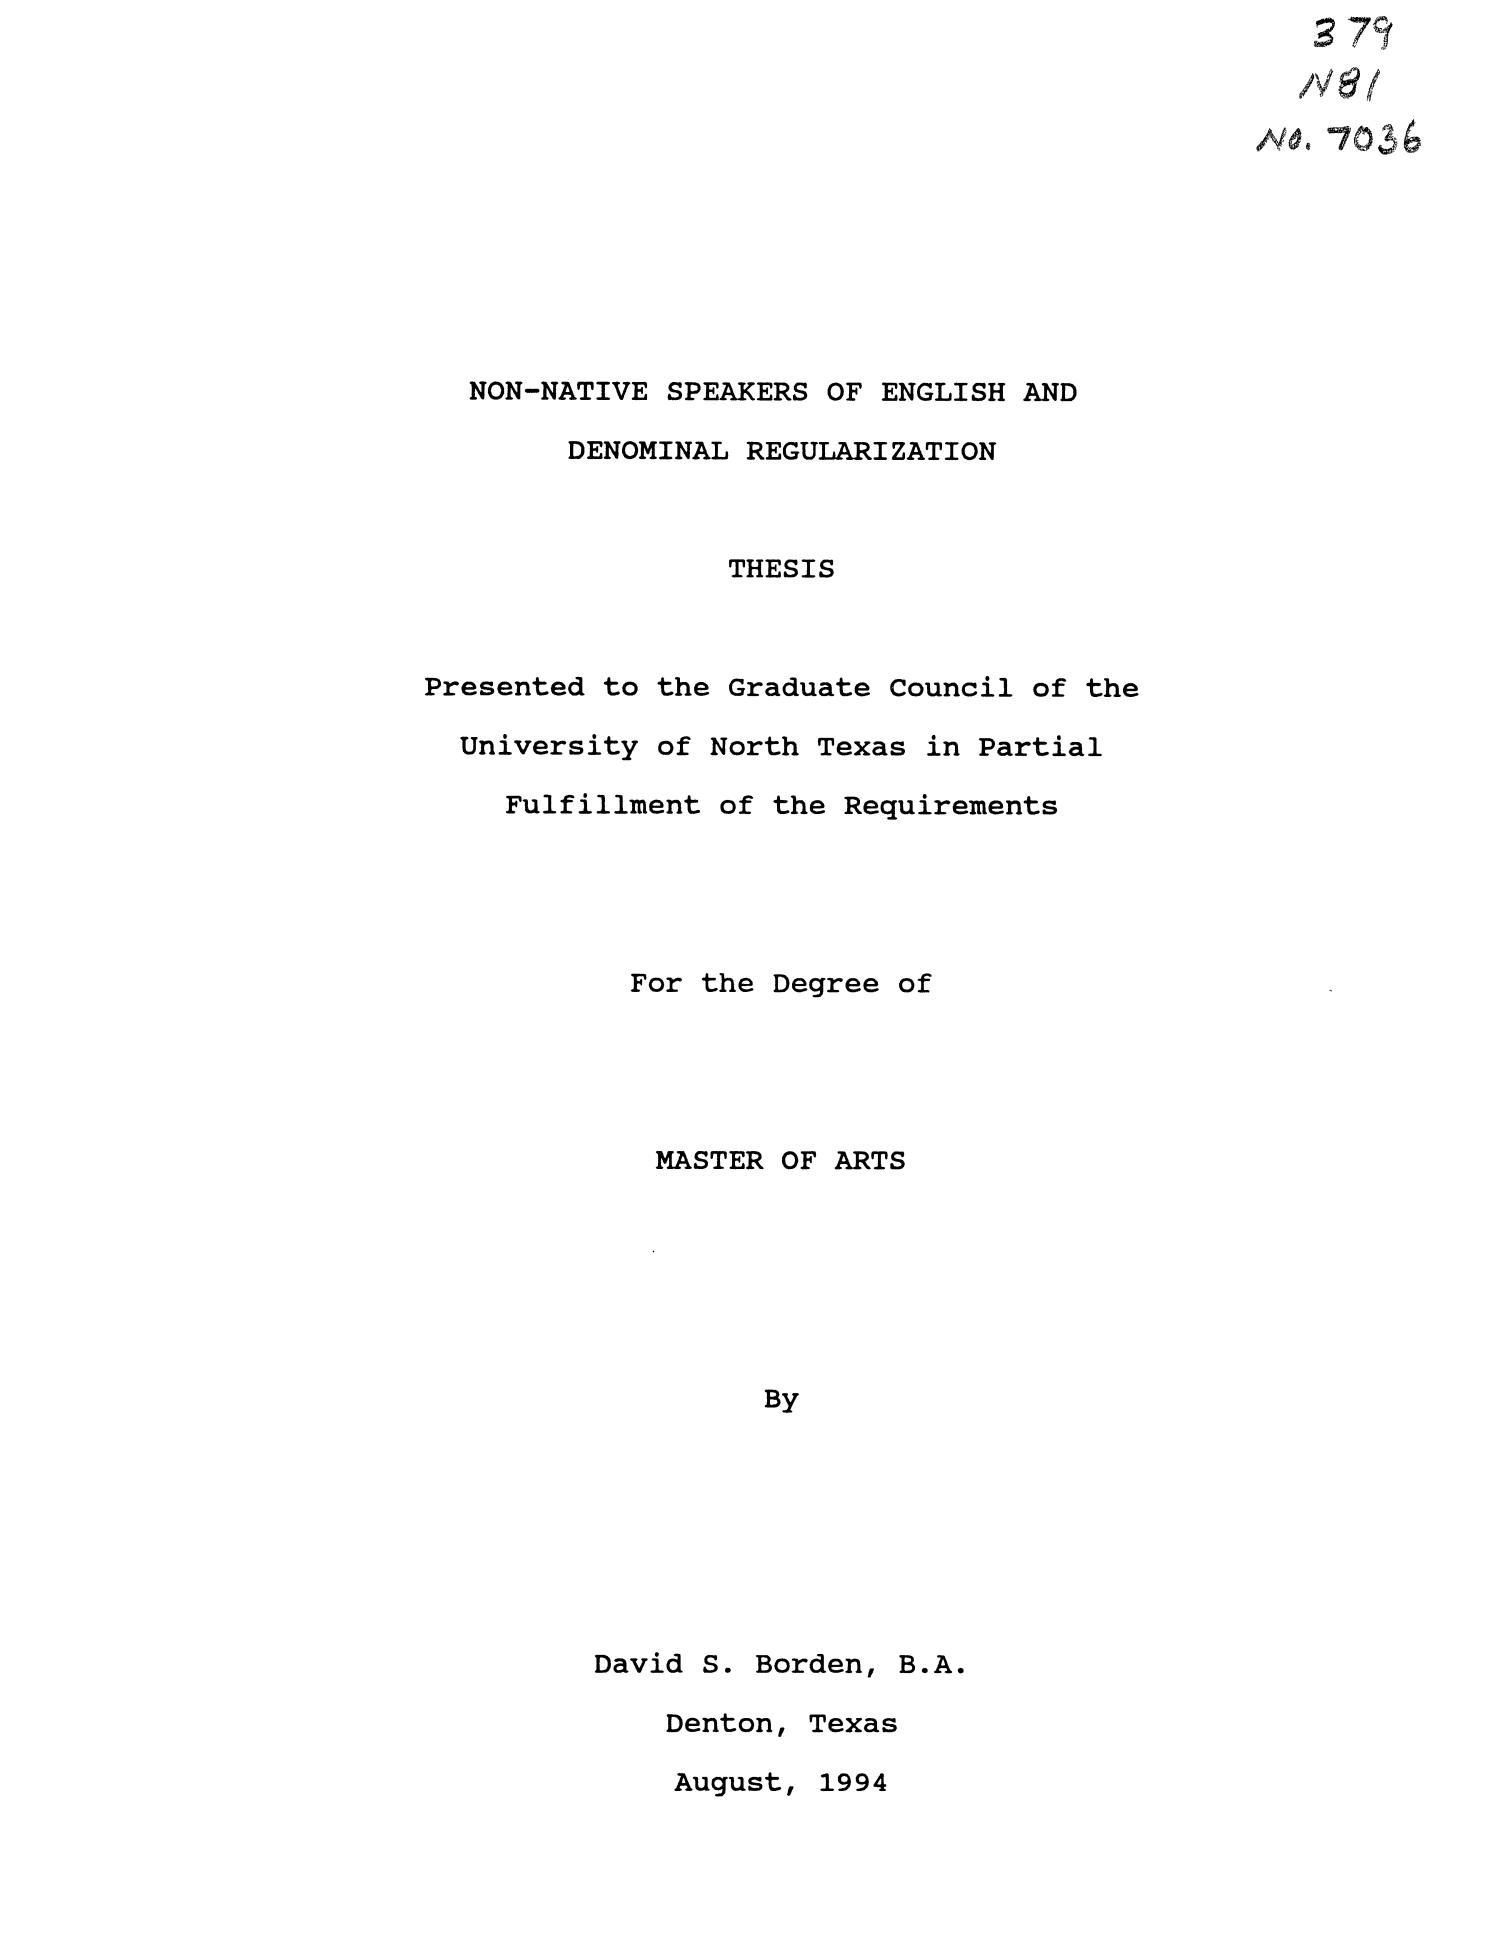 Non-Native Speakers of English and Denominal Regularization
                                                
                                                    Title Page
                                                